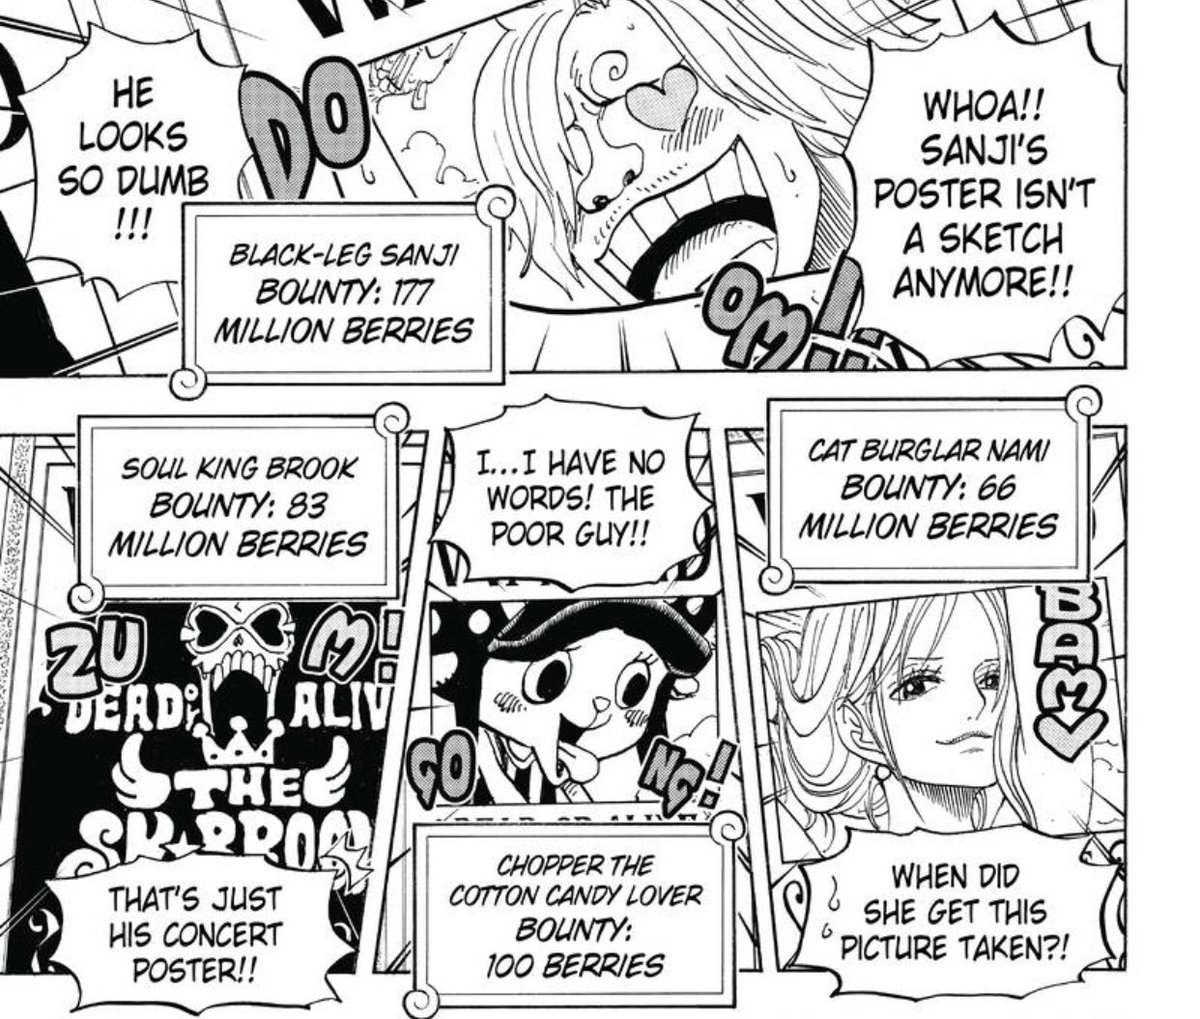 Chapter 801 - Bounty updates are always fun, somehow it gets funnier every time  Chopper only have a 100 berry bounty, Franky getting mad at the One True God Usopp, it’s all a riot. Nami’s new photo has such ENERGY good Lord. Also, Sanji finally having a real photo lol  #OPGrant